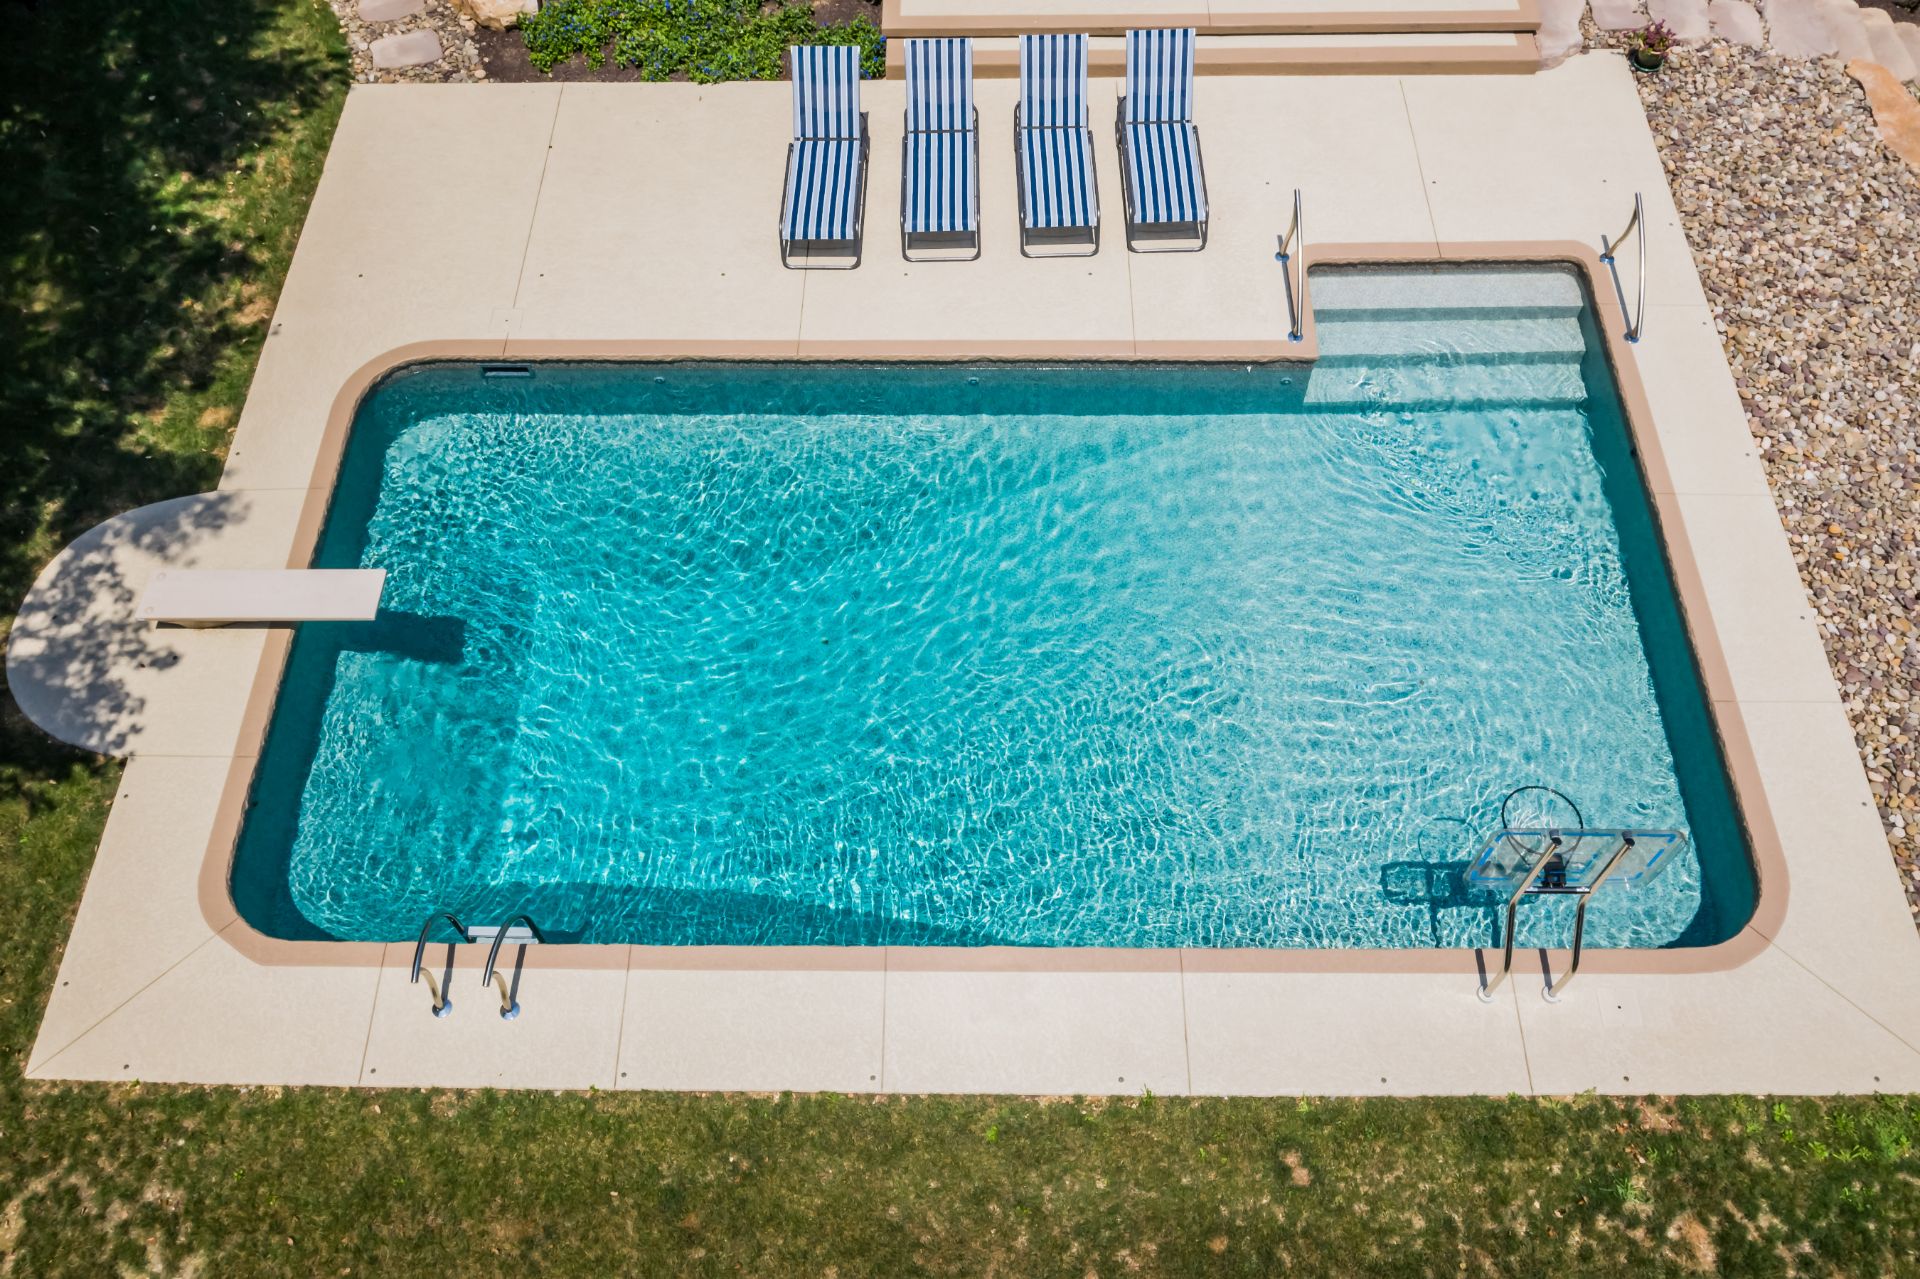 An inground vinyl liner pool that can be heated to extend your swim season.